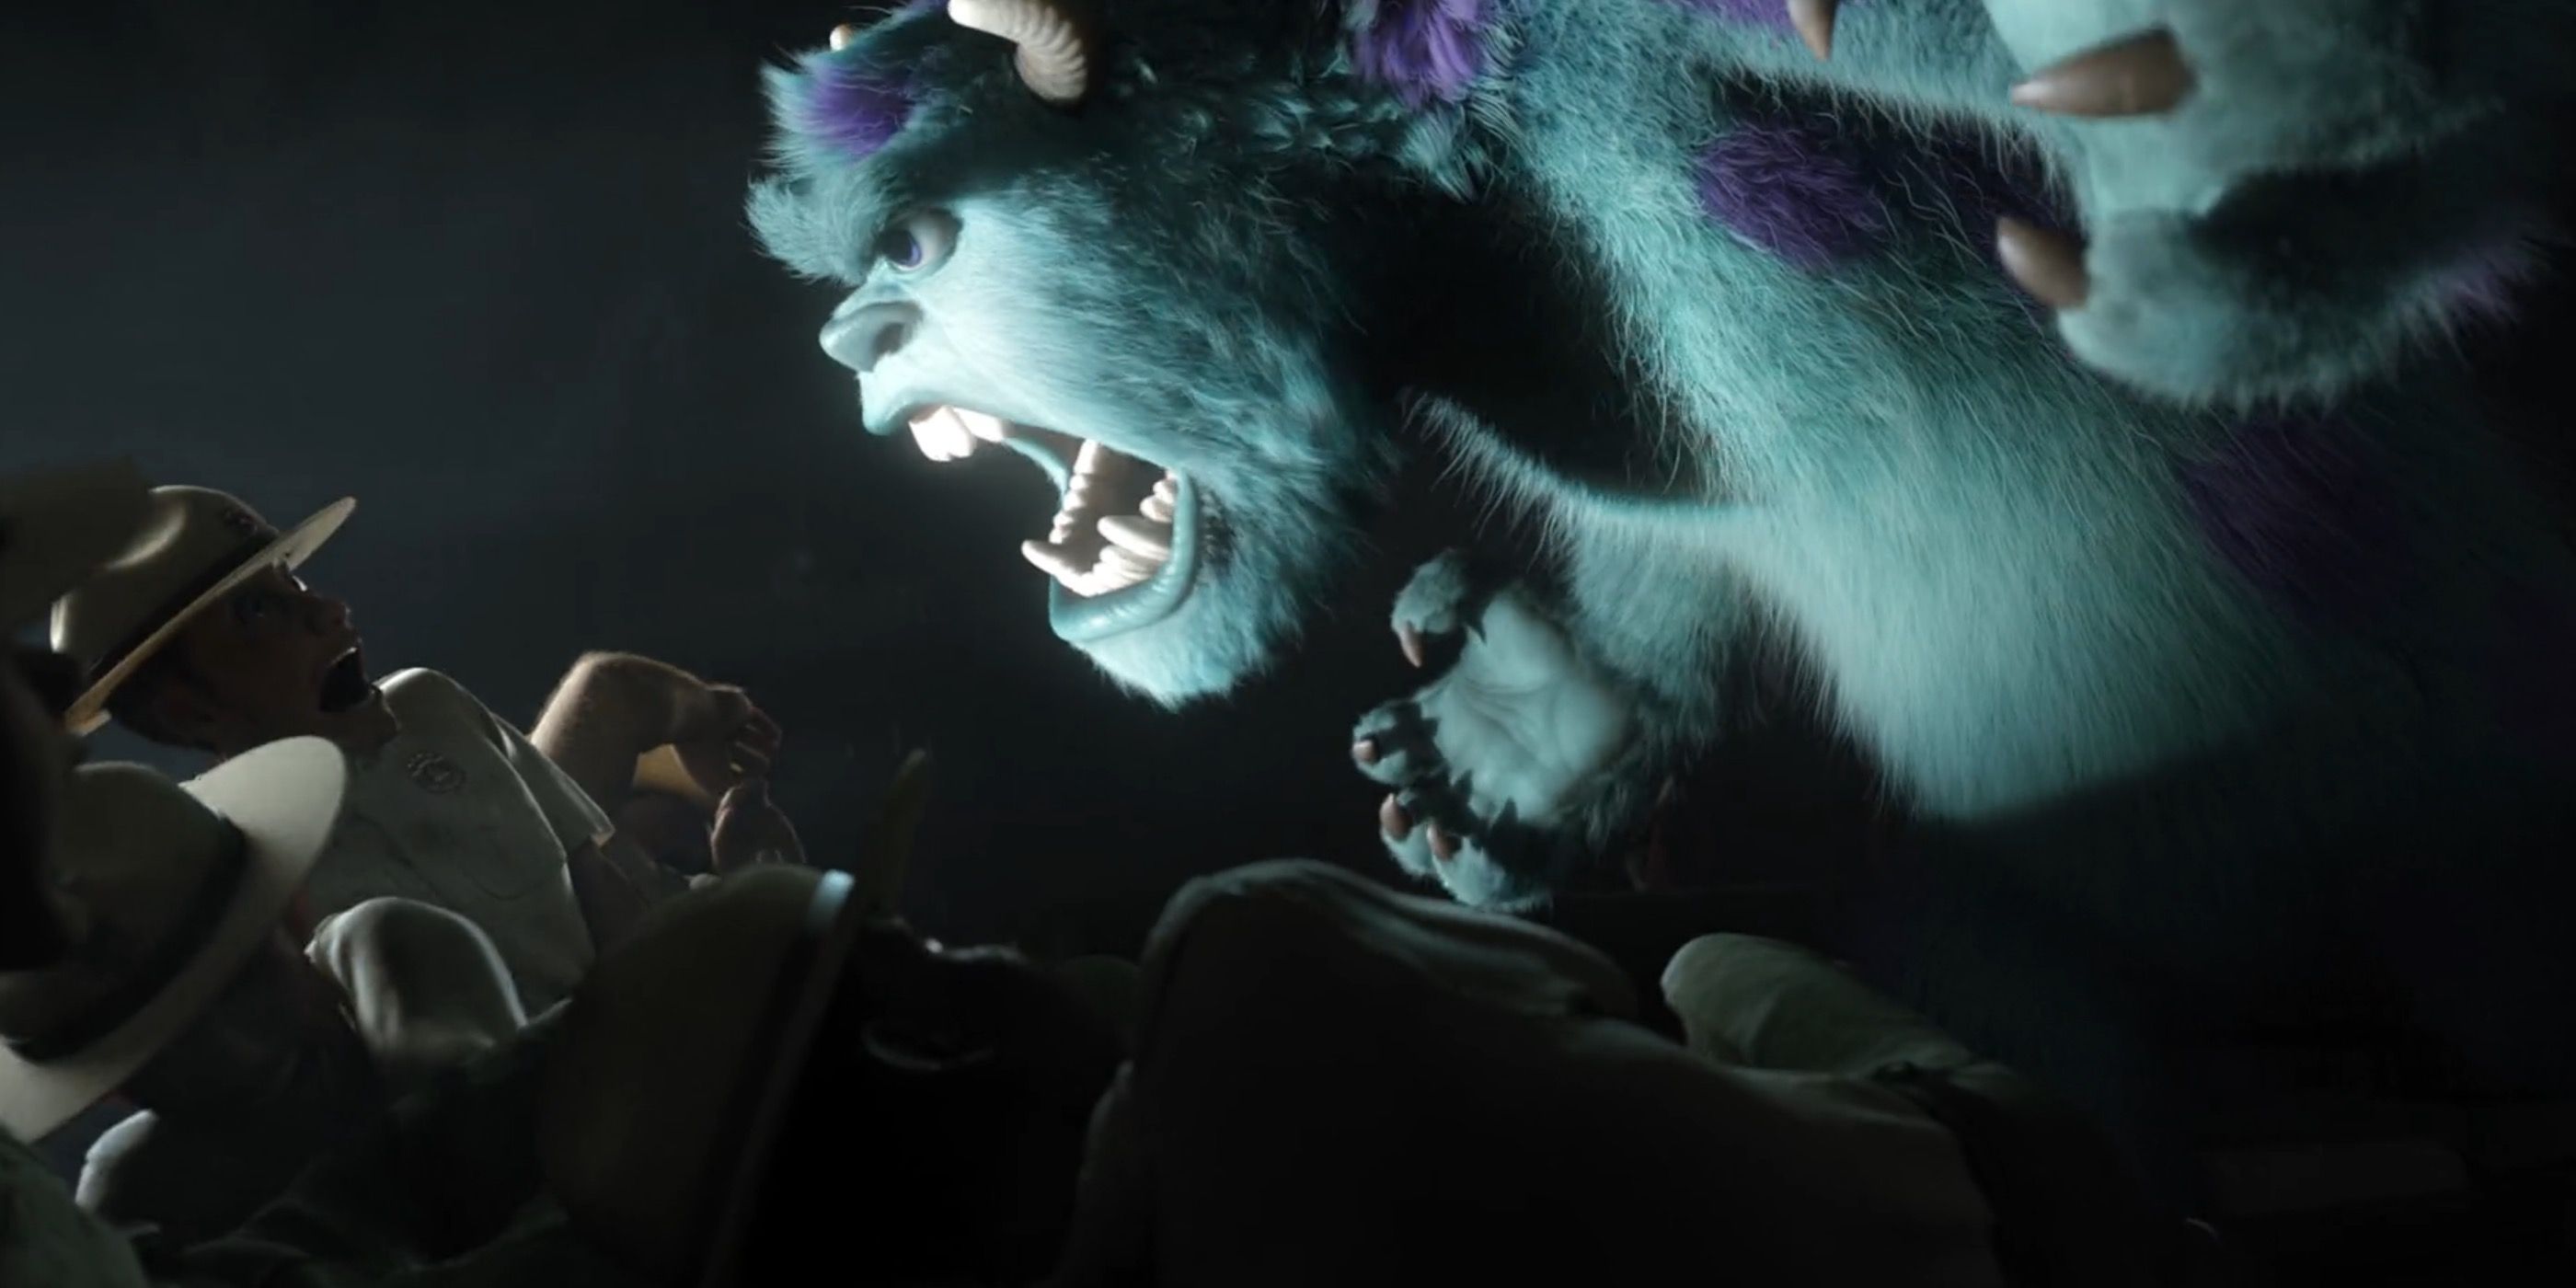 Sulley roaring at someone in Monsters University